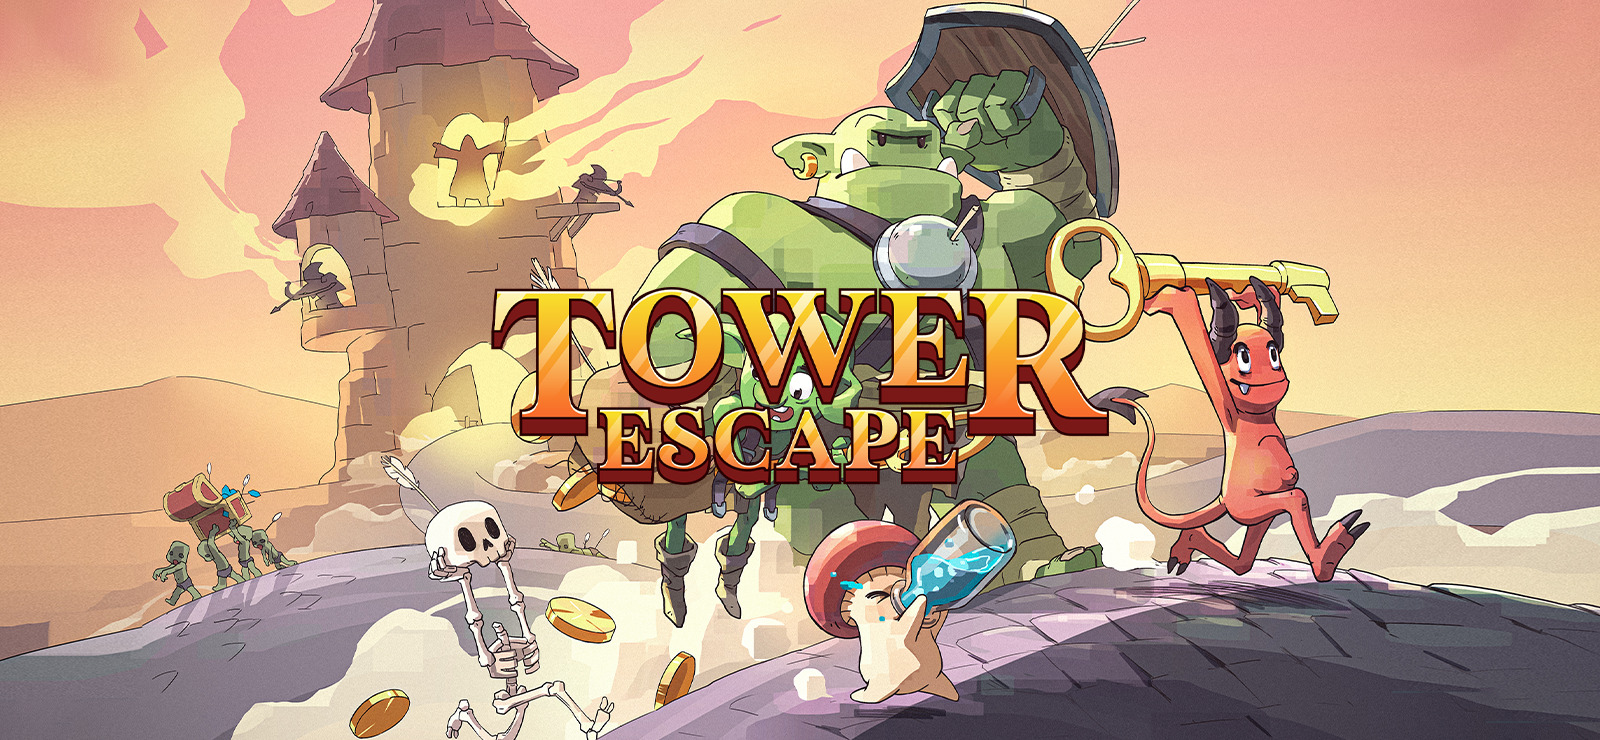 s first mobile game adds a twist to tower defense (pictures) - CNET